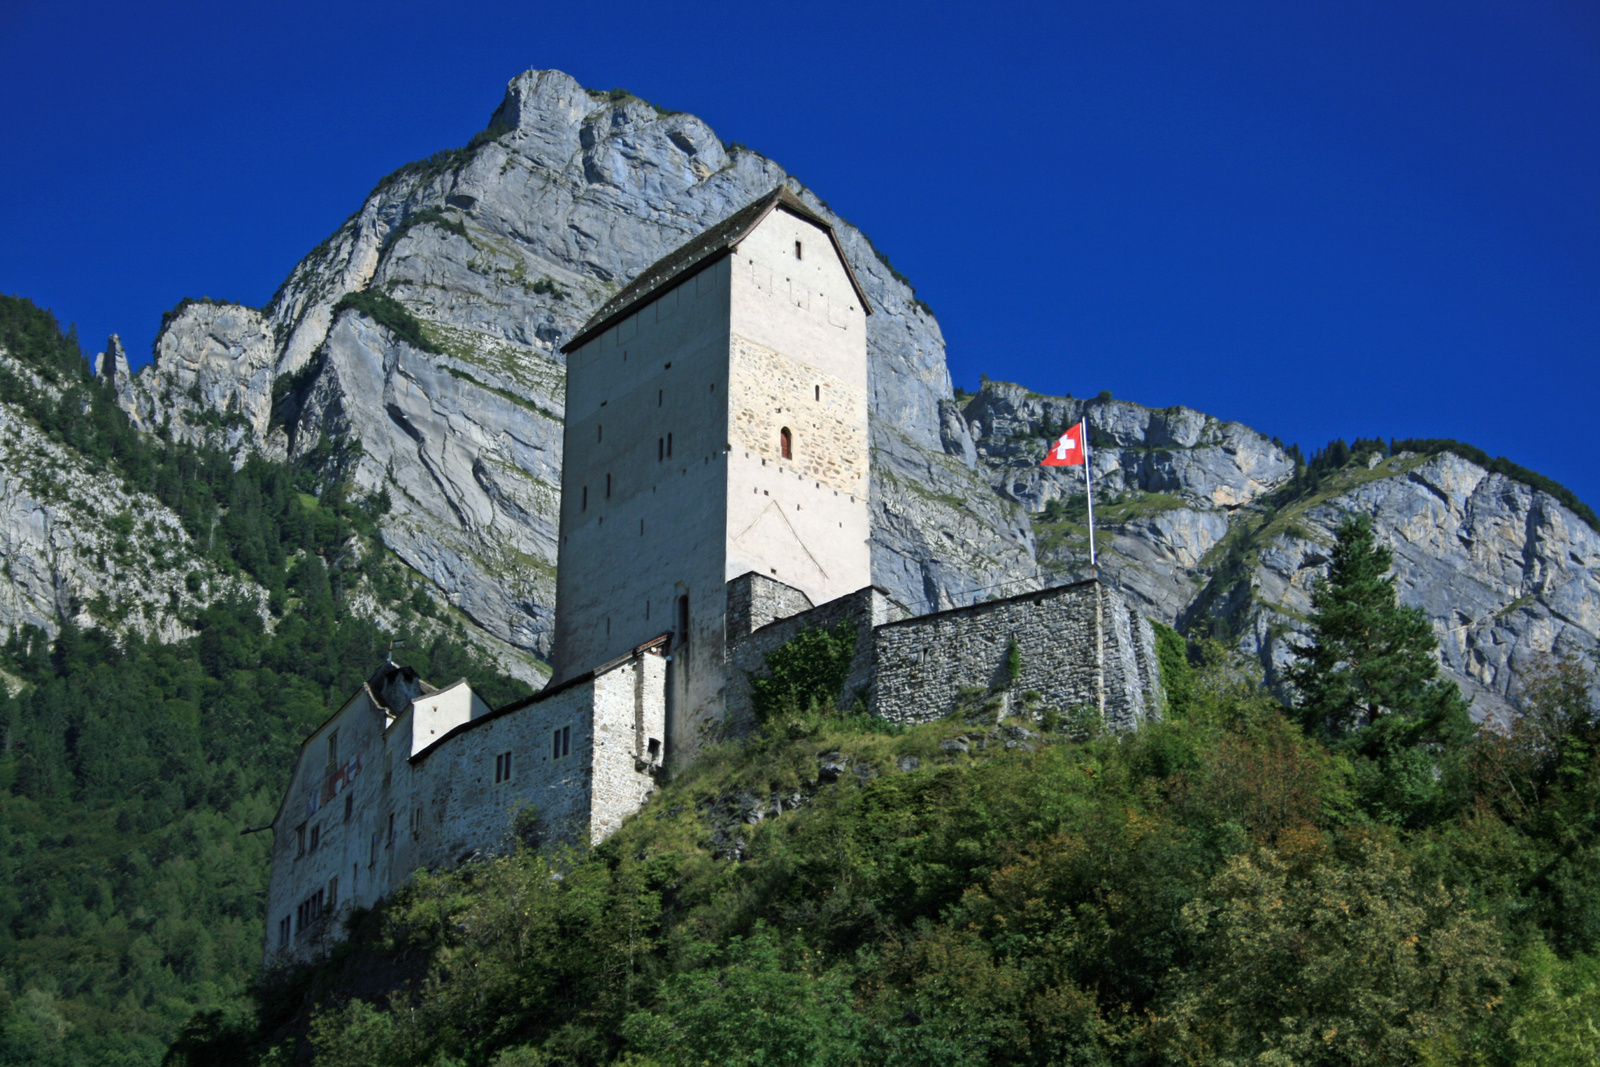 The museum is located in the Sargans Castle